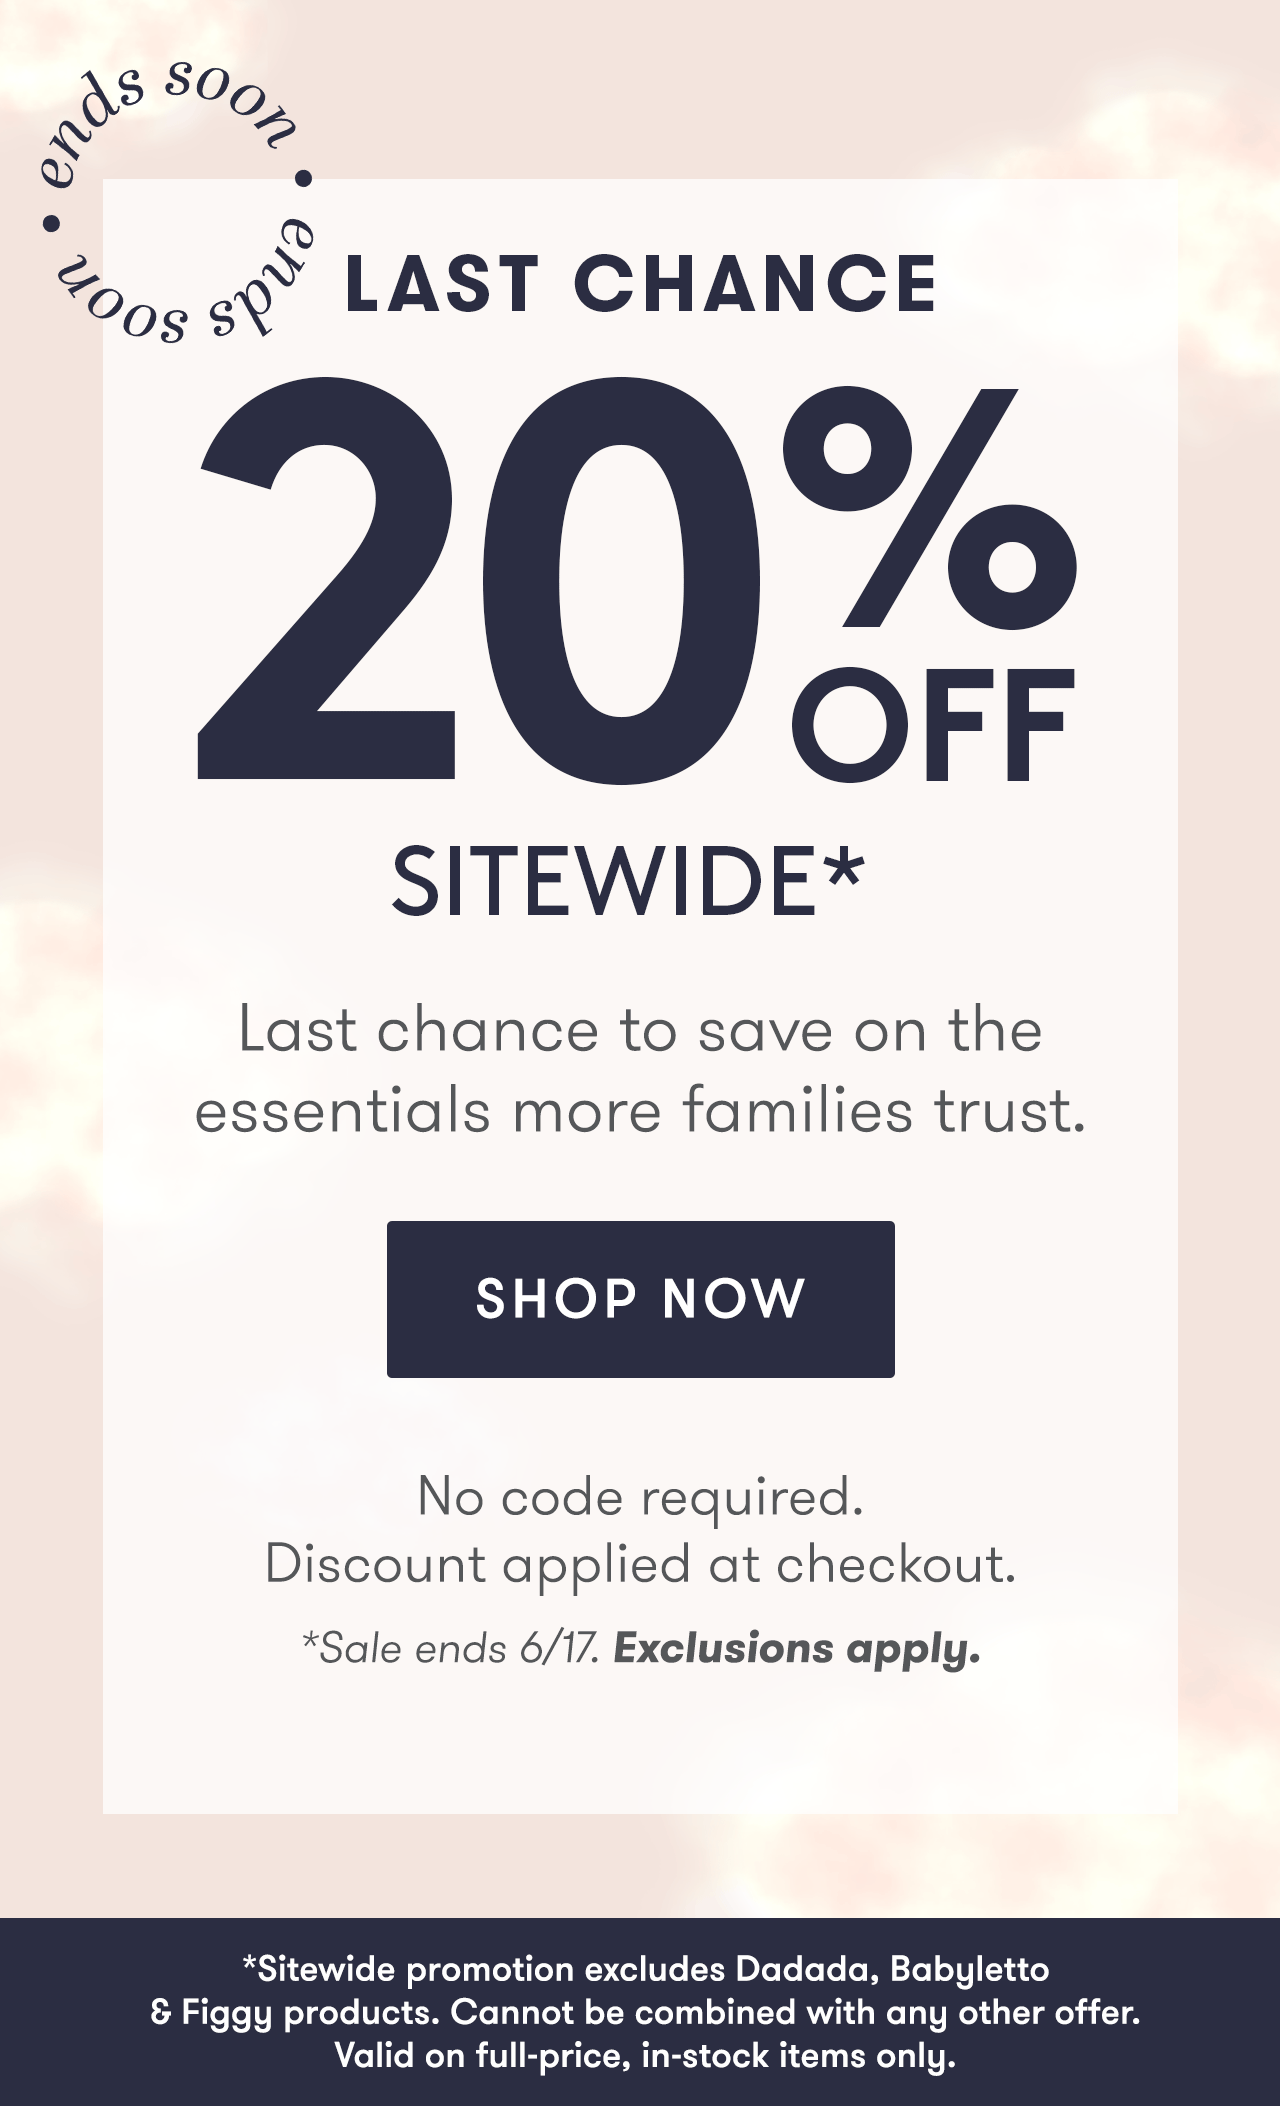 Last chance to save 20% sitewide*! Offer ends at midnight!